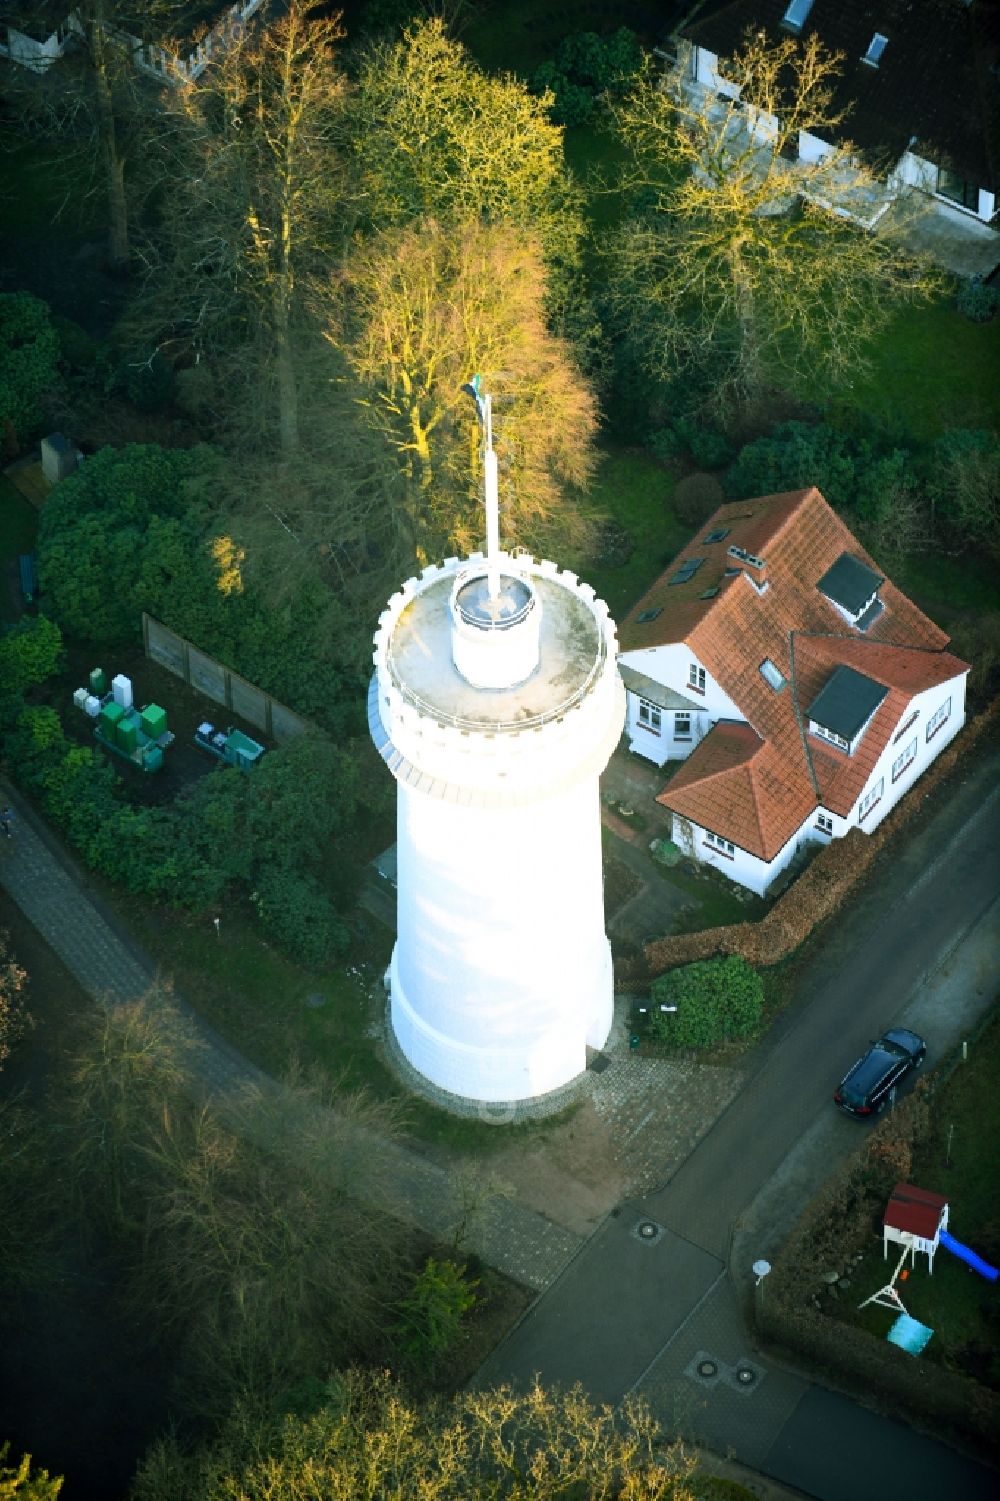 Aumühle from the bird's eye view: Tower building of the Bismarck tower - observation tower in Aumuehle in the state Schleswig-Holstein, Germany